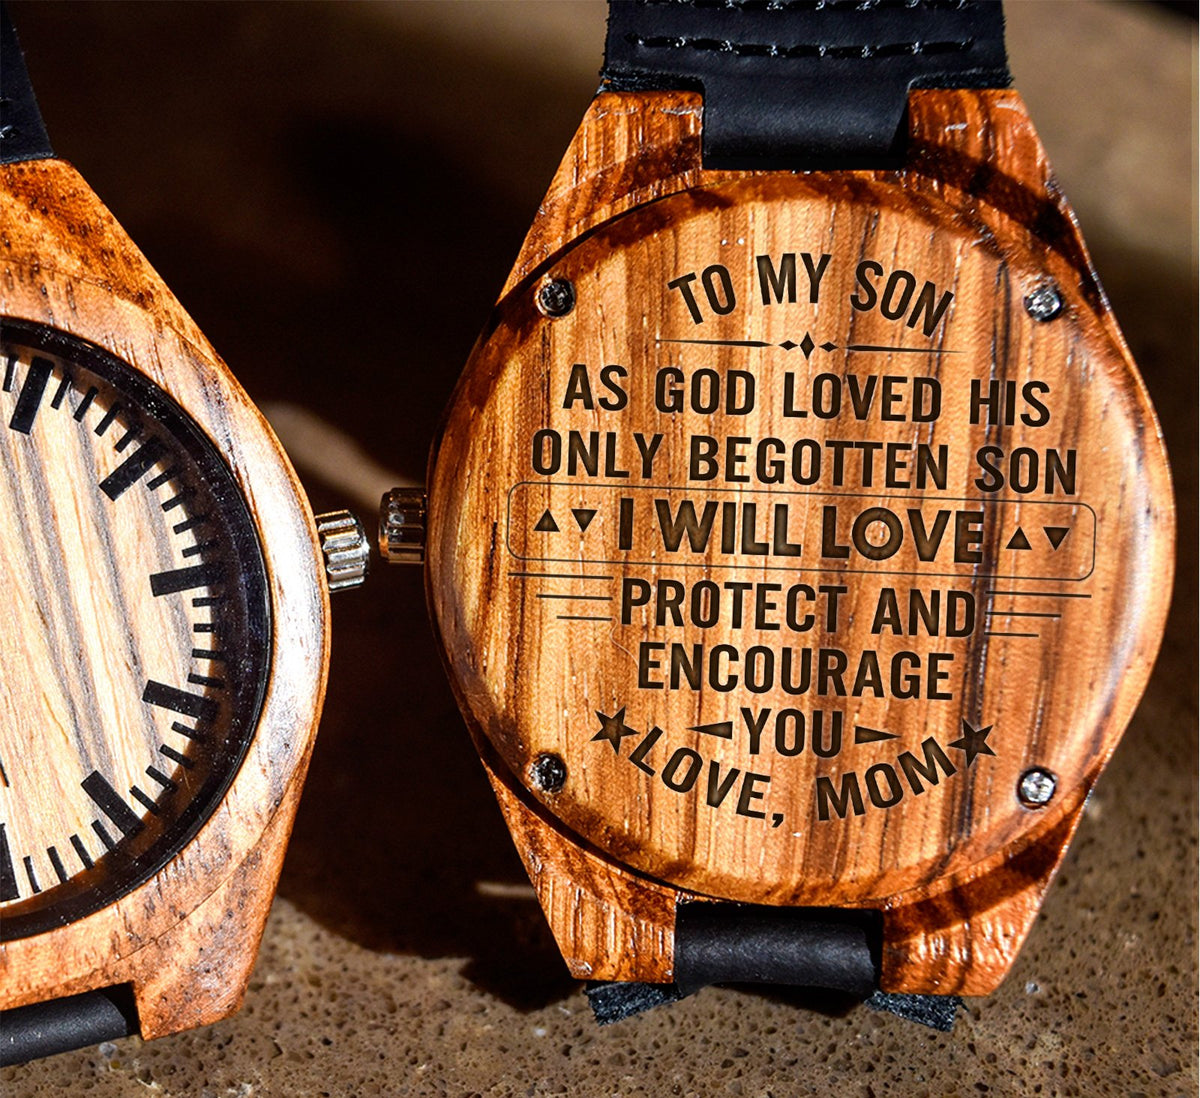 To My Son - I Will Love Protect and Encourage you - Wooden Watch